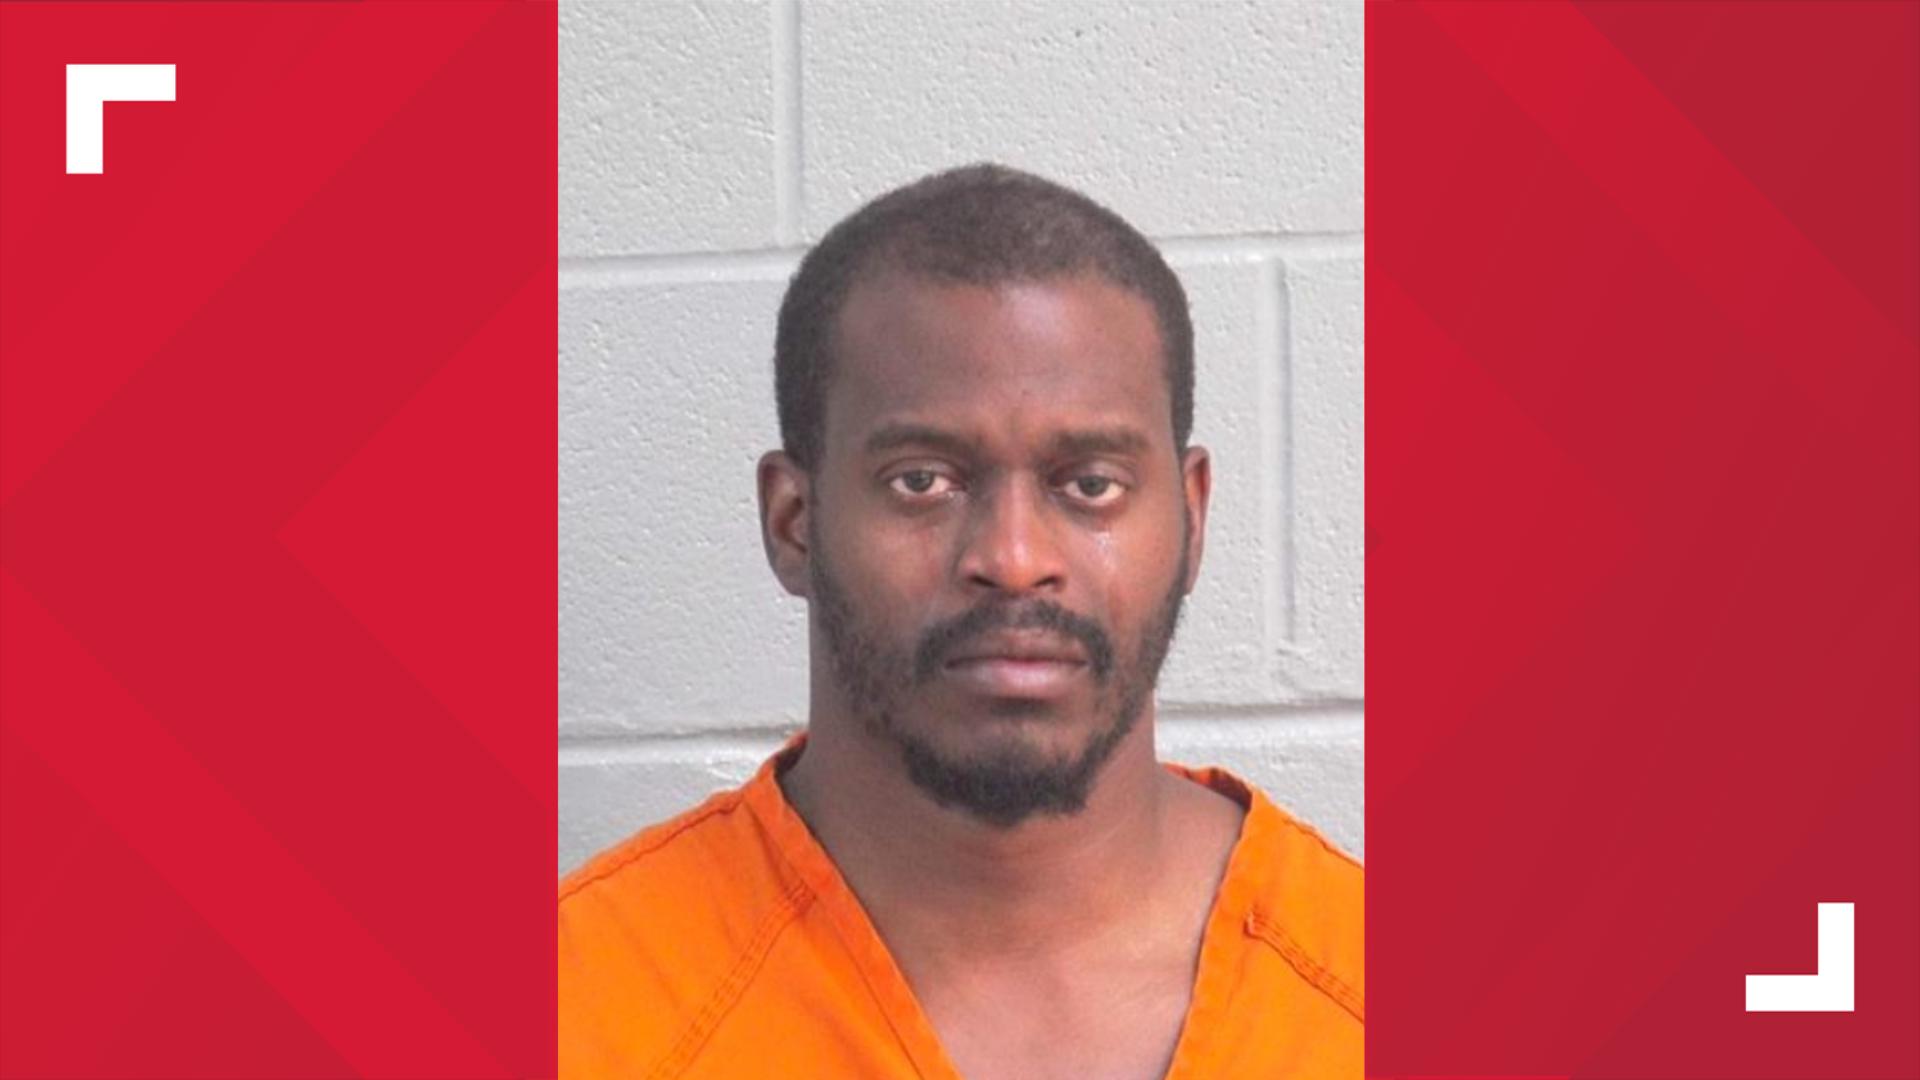 According to the City of Midland, the suspect has been identified as 33-year-old Samuel Omamogho. He was arrested on-site and later charged with murder.